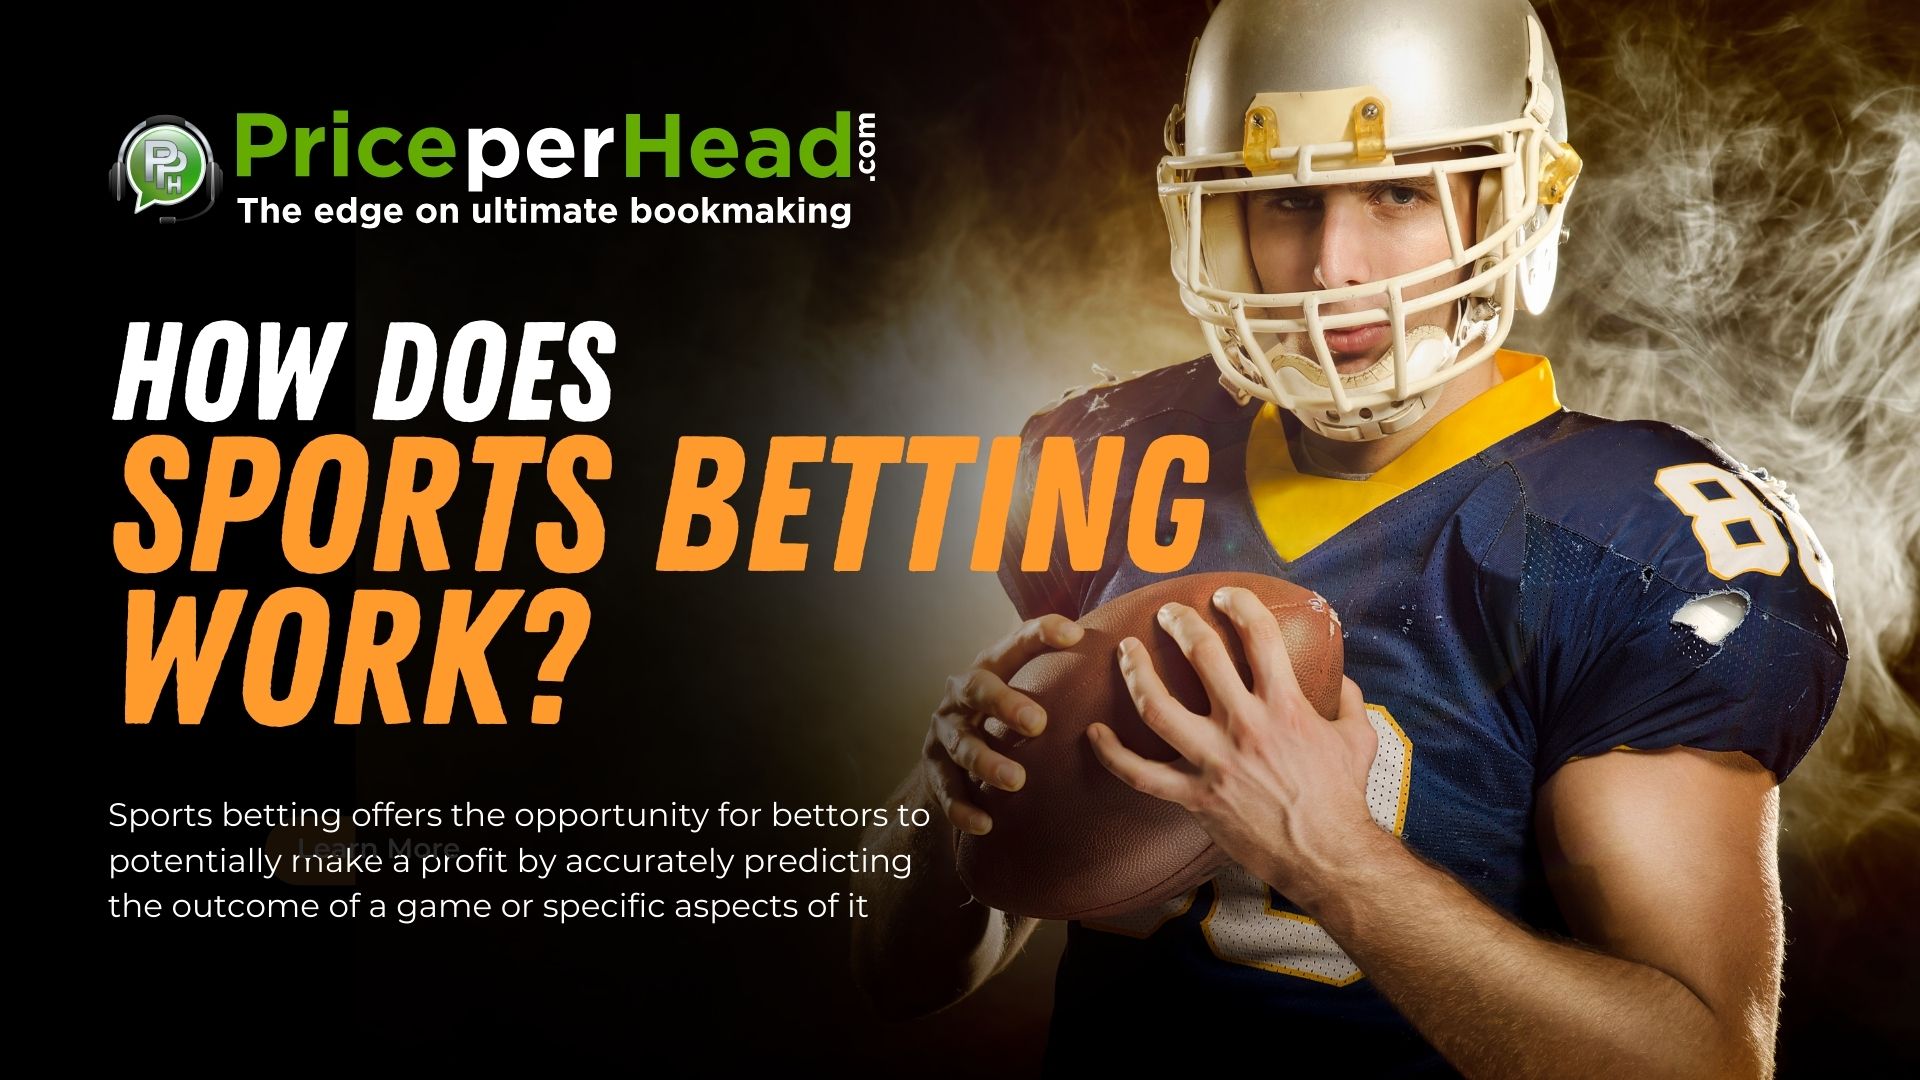 how does sports betting work, price per head, pay per head, sportsbook